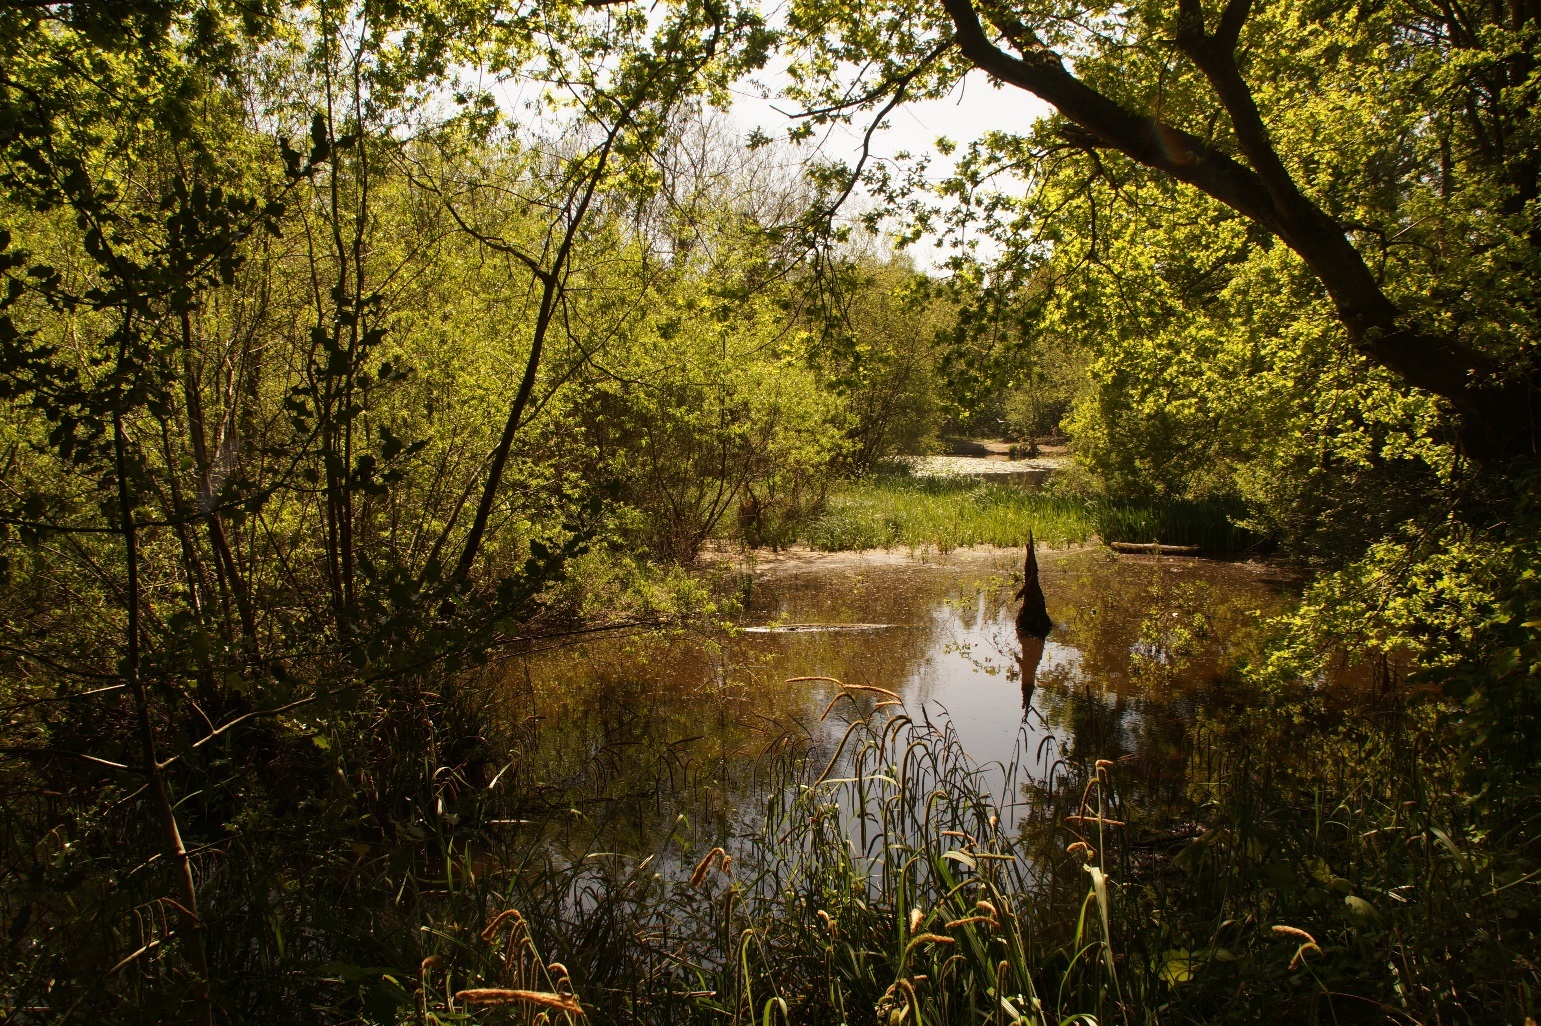 A large pond surrounded by green trees and bushes. Saturation has been added to the image to make it darker.